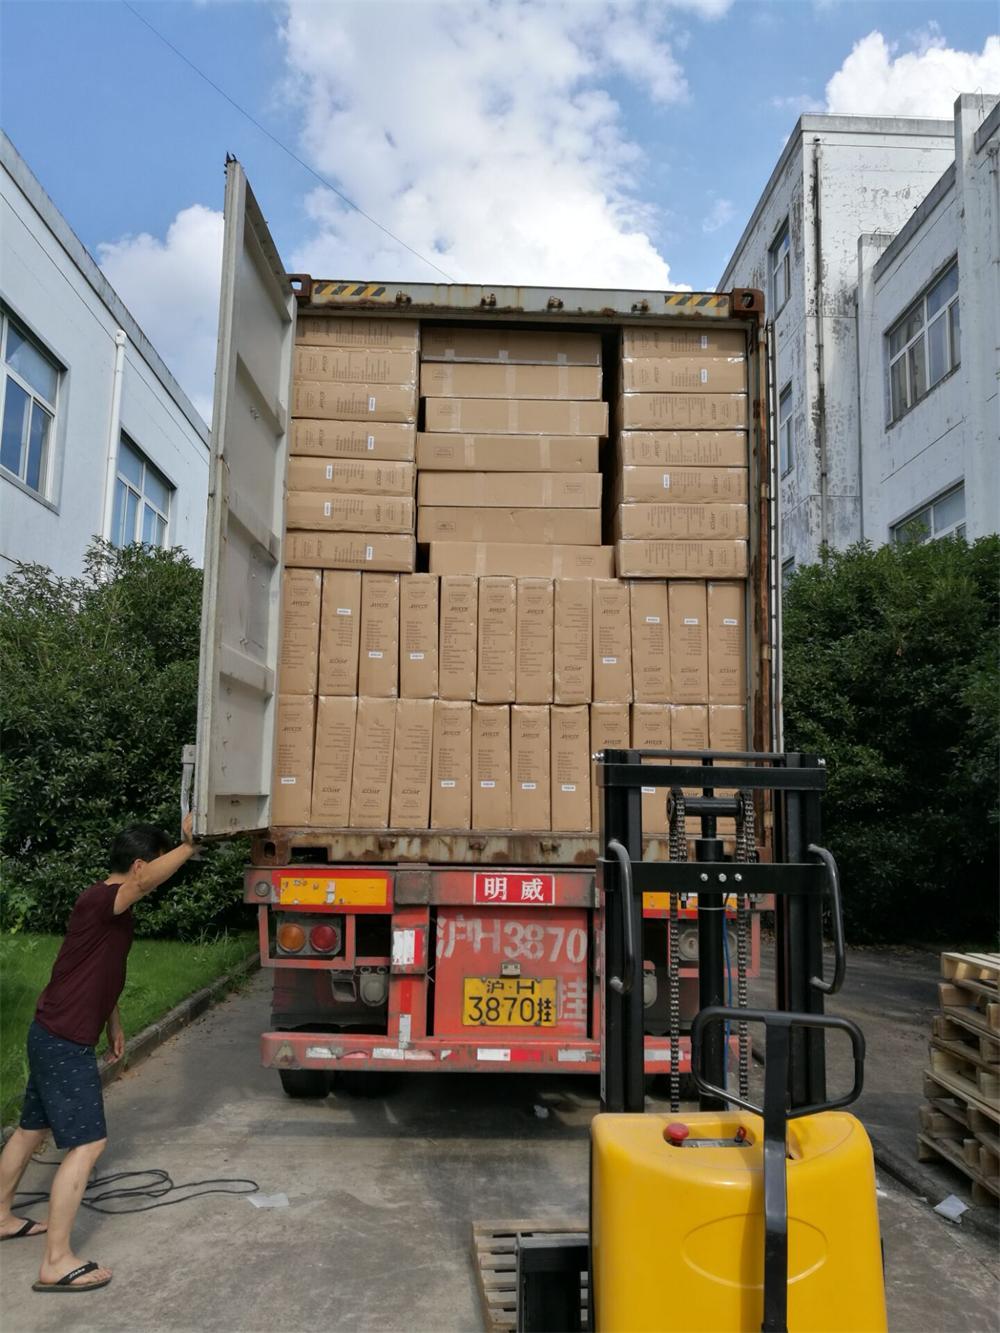 2 40HQ container of H-ROOT massage table loading From Our Factory